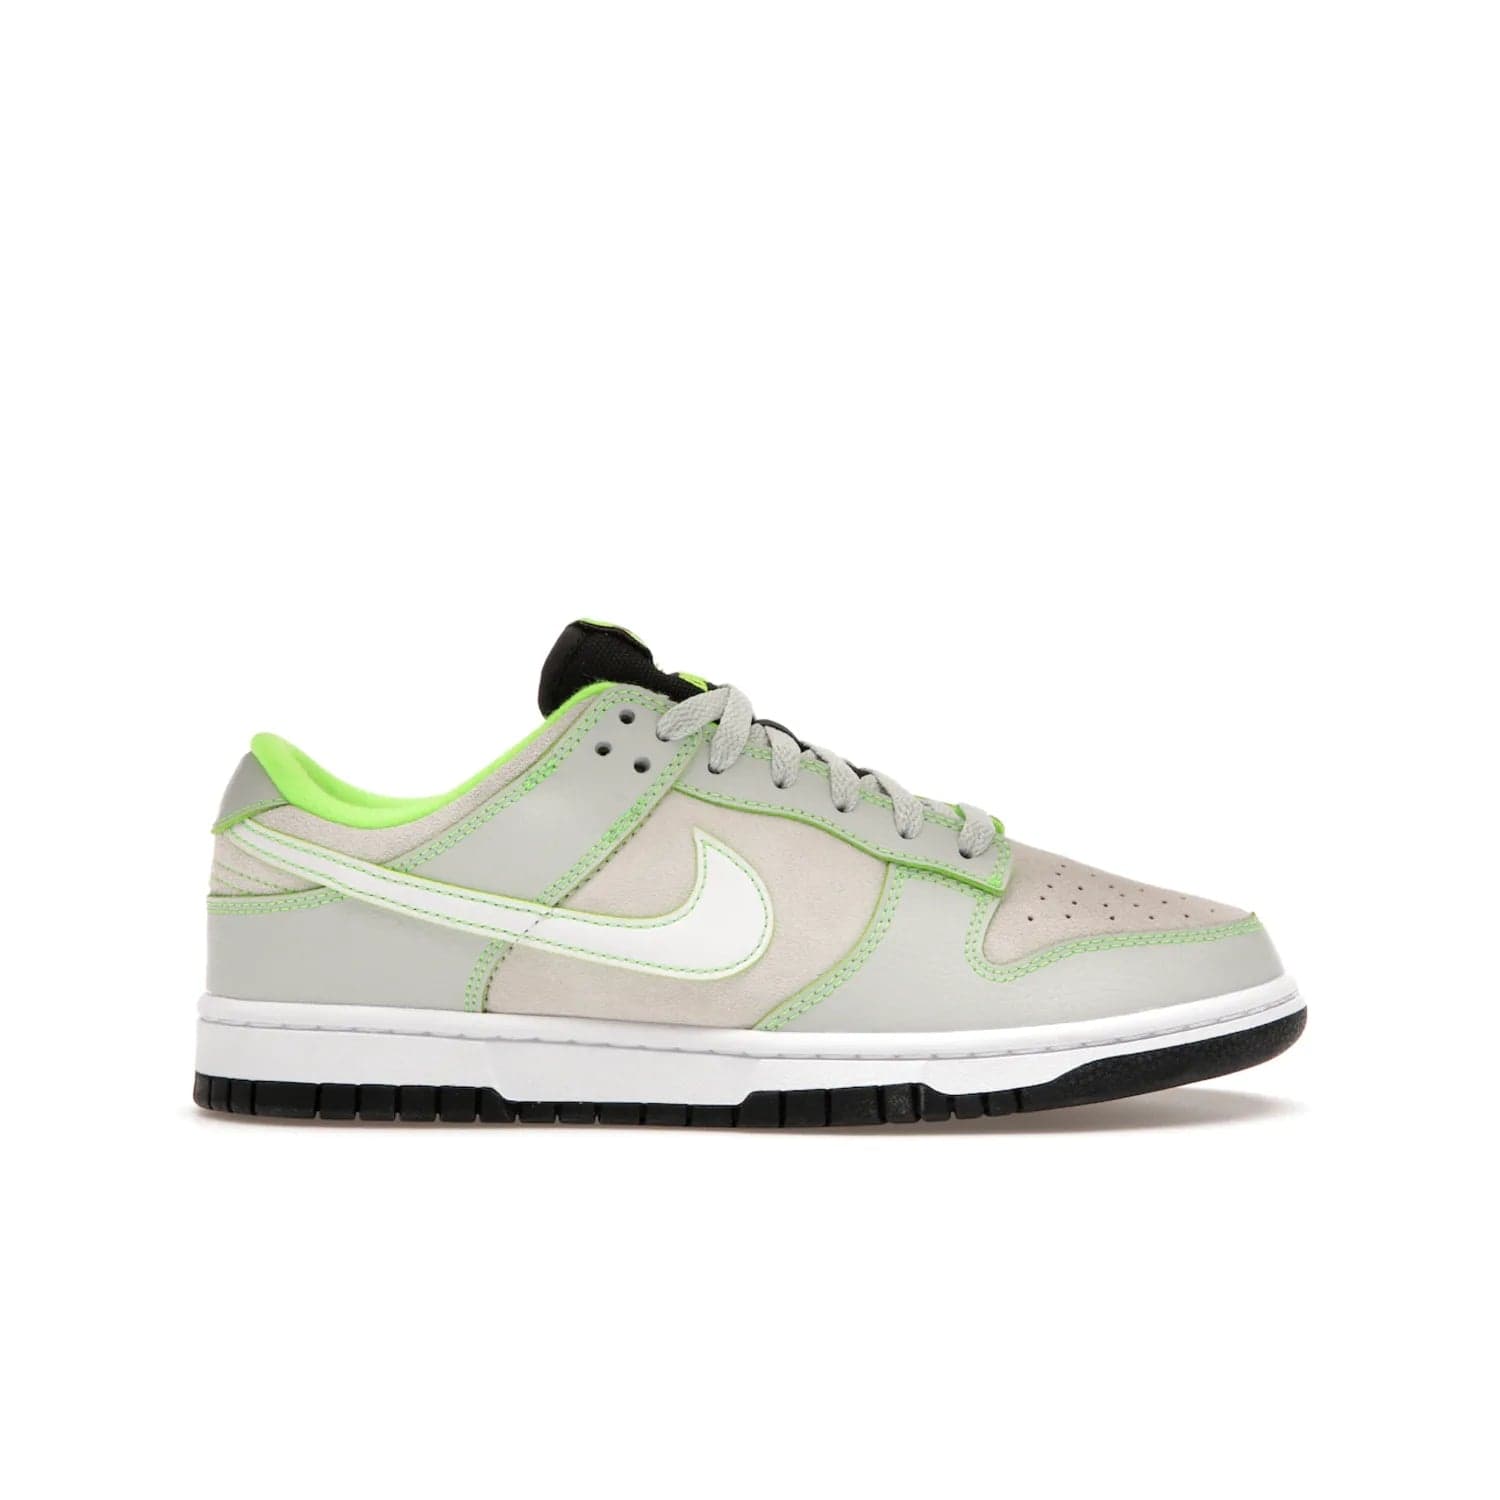 Nike Dunk Low University of Oregon PE (2023) - Image 1 - Only at www.BallersClubKickz.com - Sleek Light Silver and White upper, complemented by Black and Electric Green accents. Nike Dunk Low University of Oregon PE, set to be released April 2023. Must-have for any serious fan.